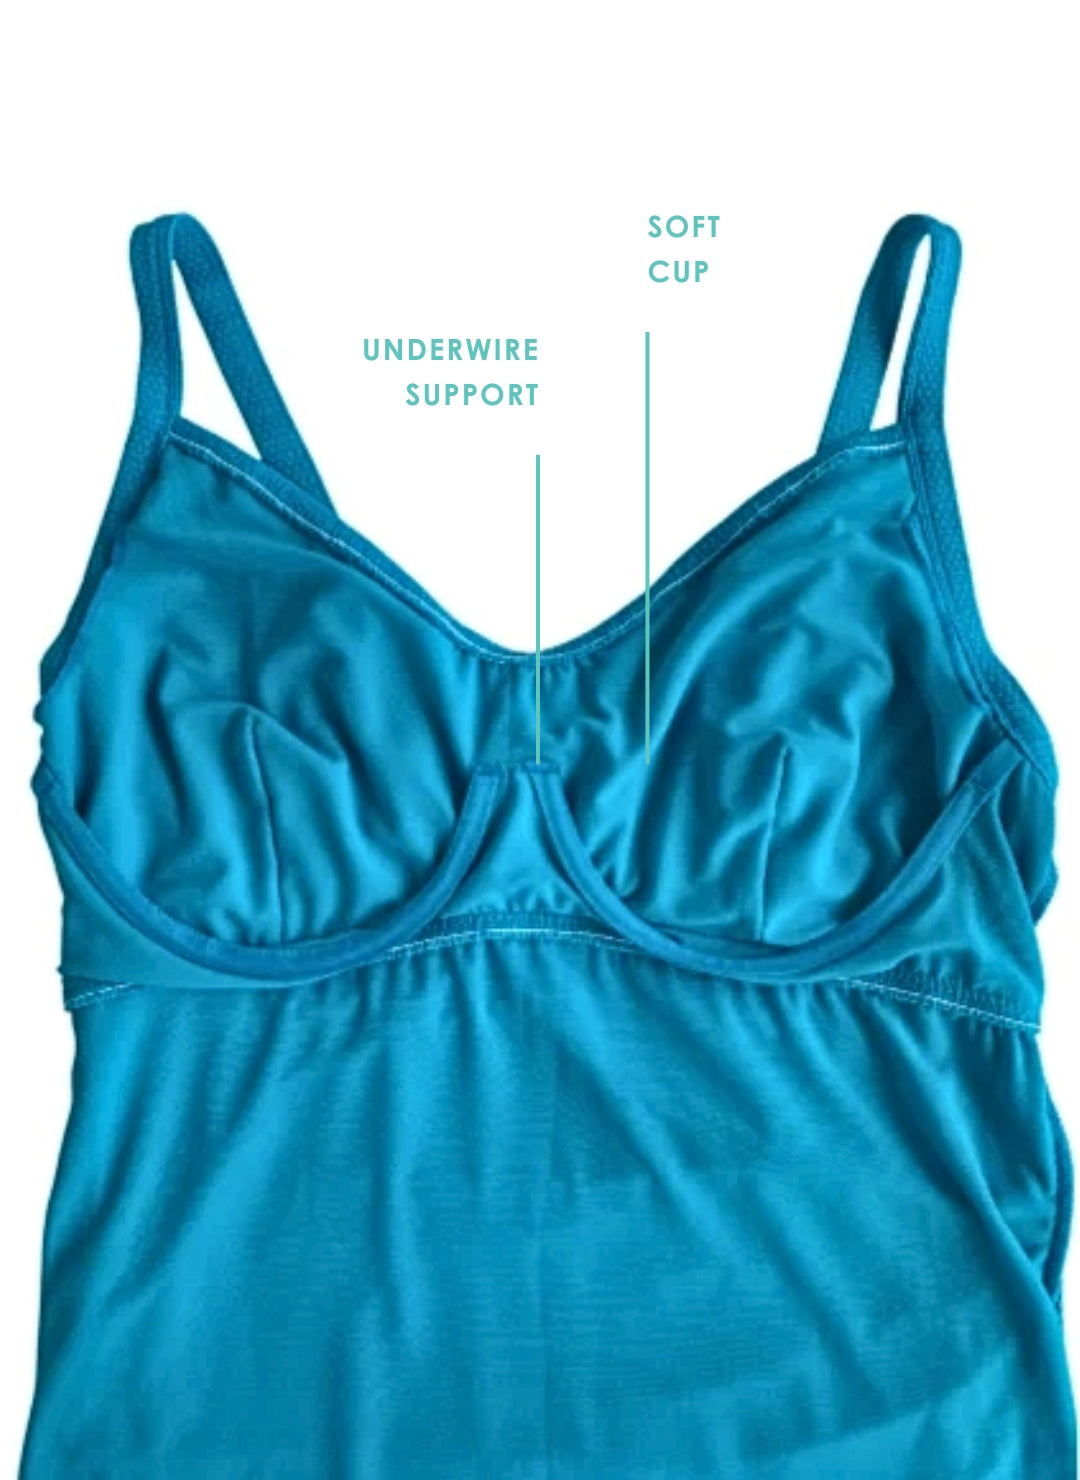 Molded or Padded Bras?, What's The Difference?